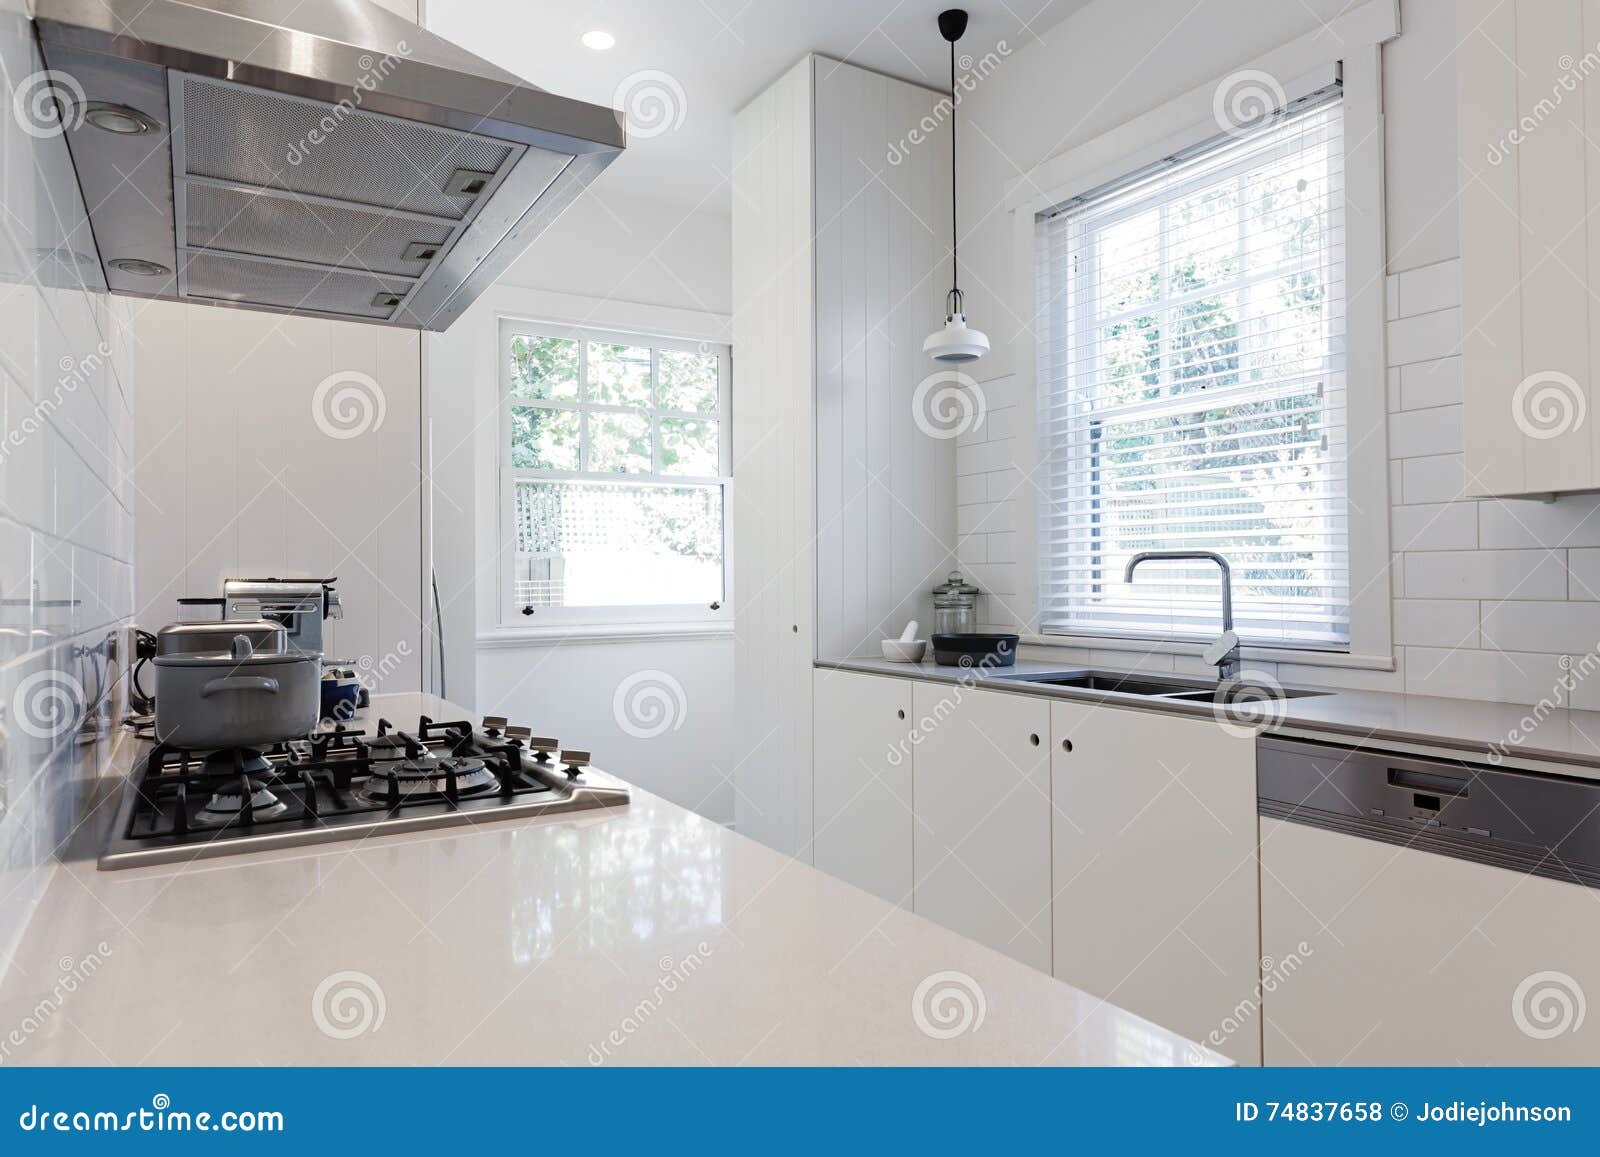 new renovated crisp white galley style kitchen